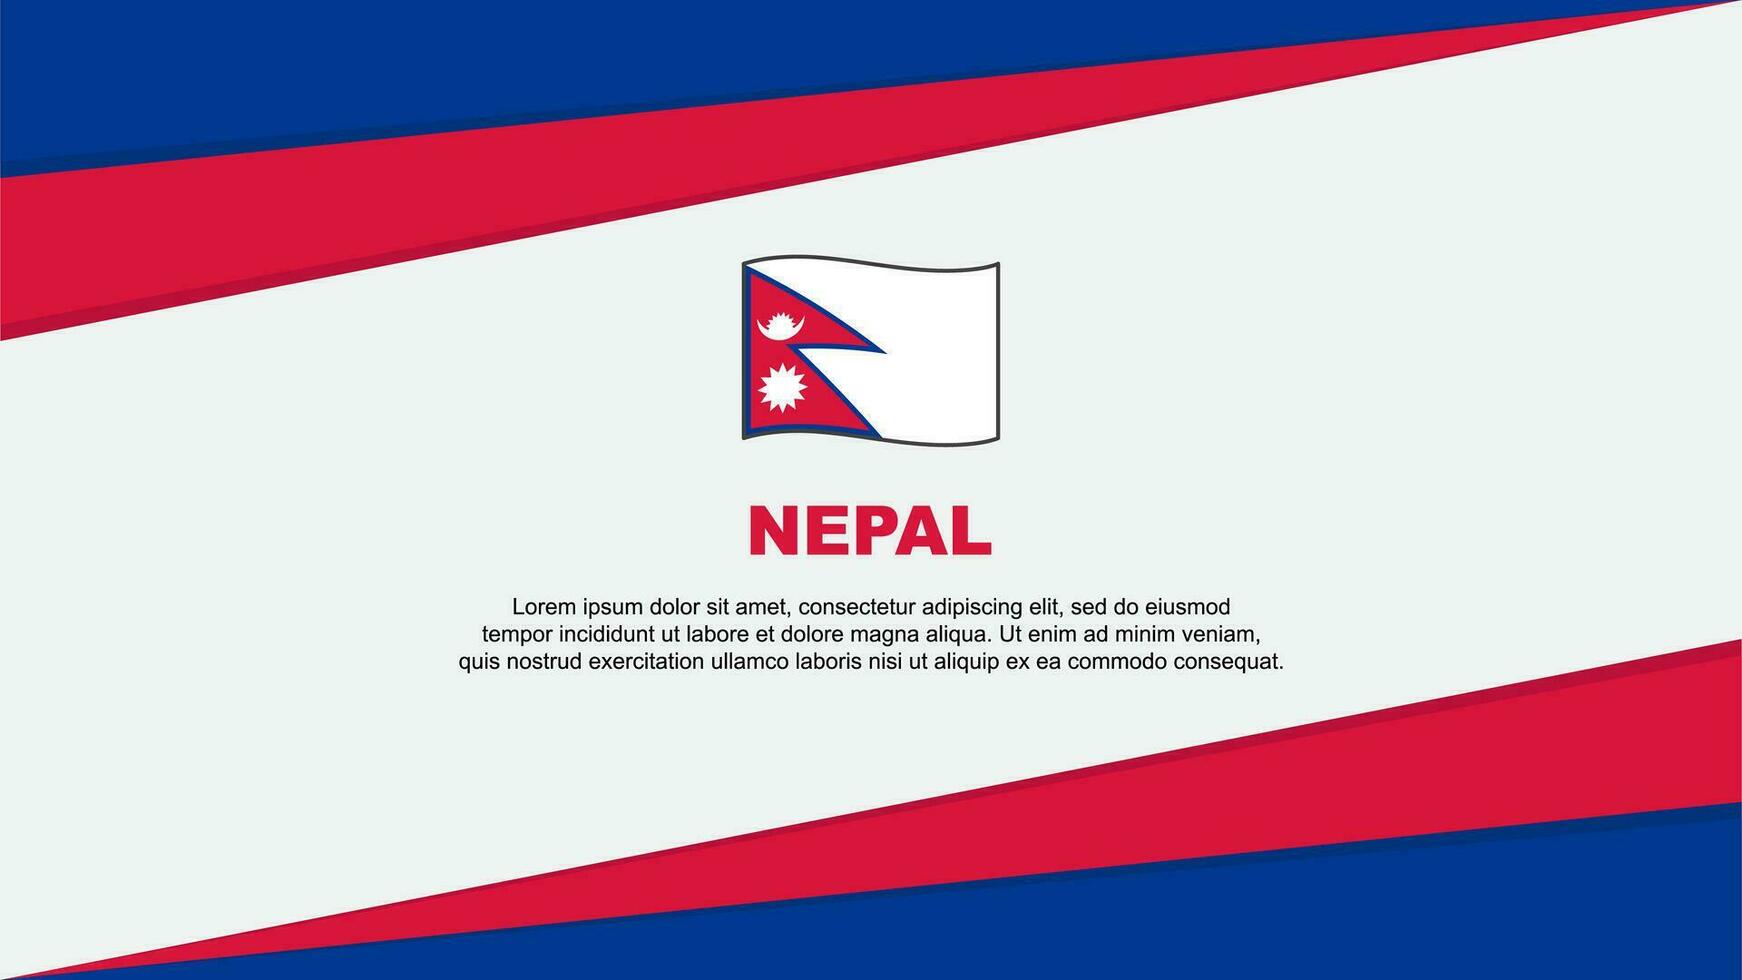 Nepal Flag Abstract Background Design Template. Nepal Independence Day Banner Cartoon Vector Illustration. Nepal Design